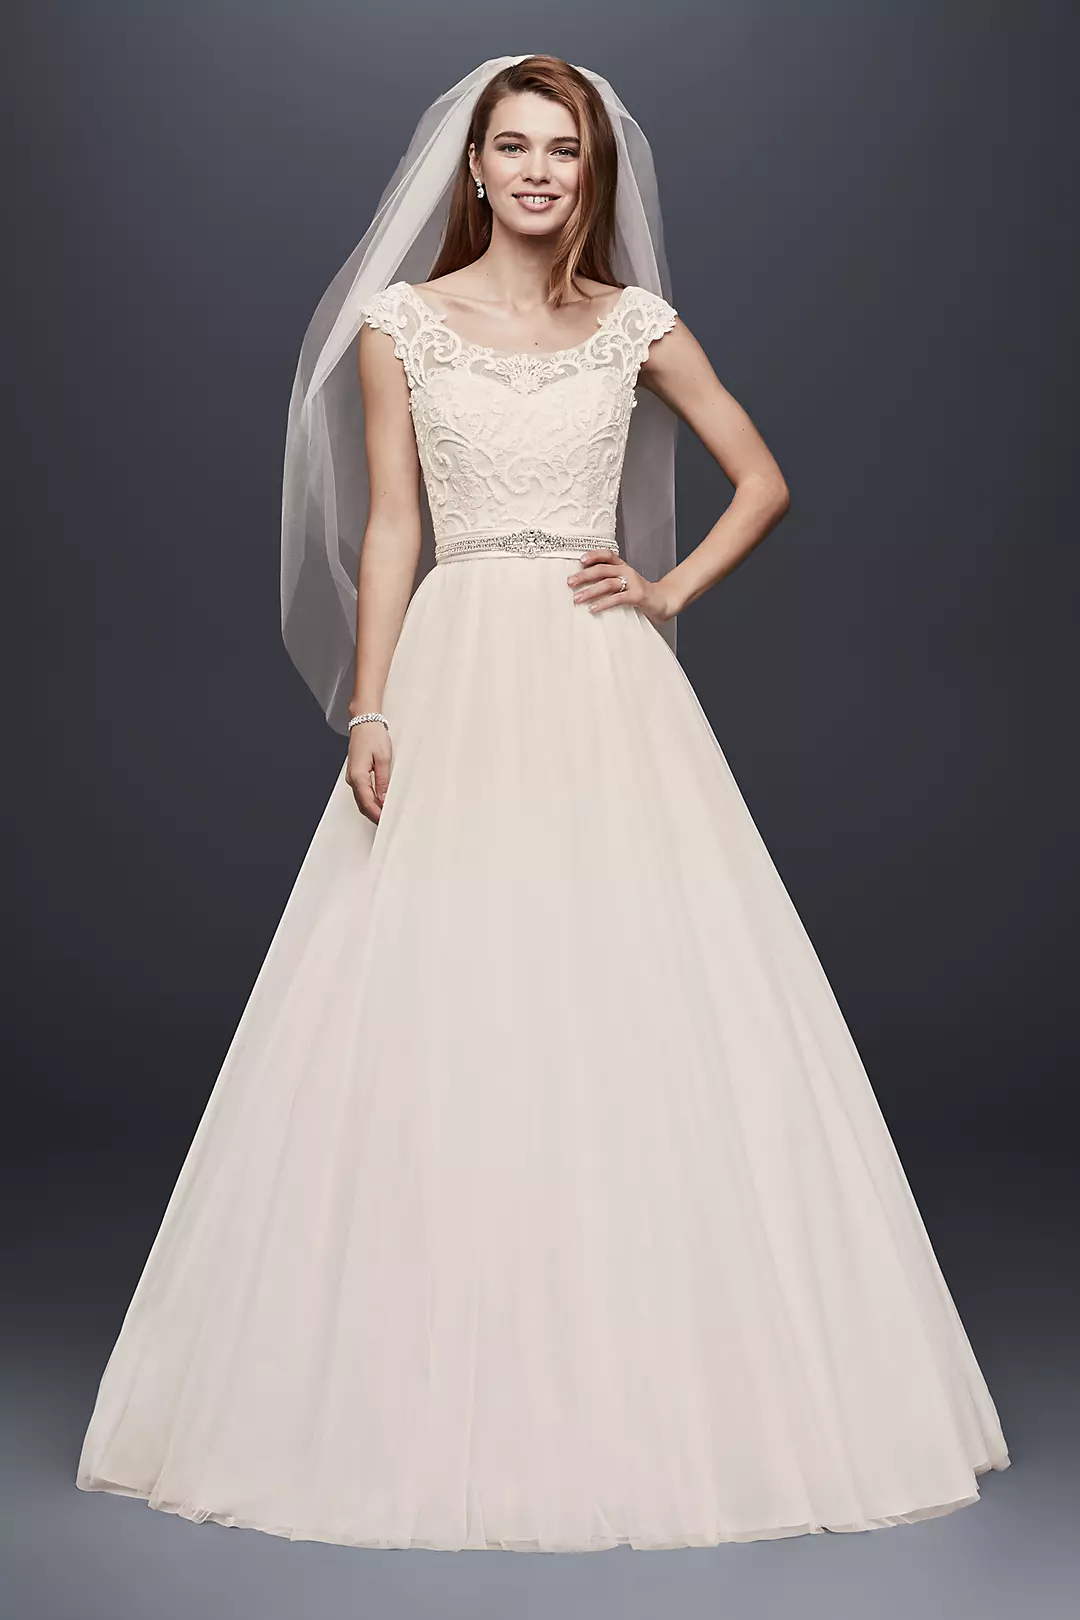 Tulle Wedding Dress with Lace Illusion Neckline Image